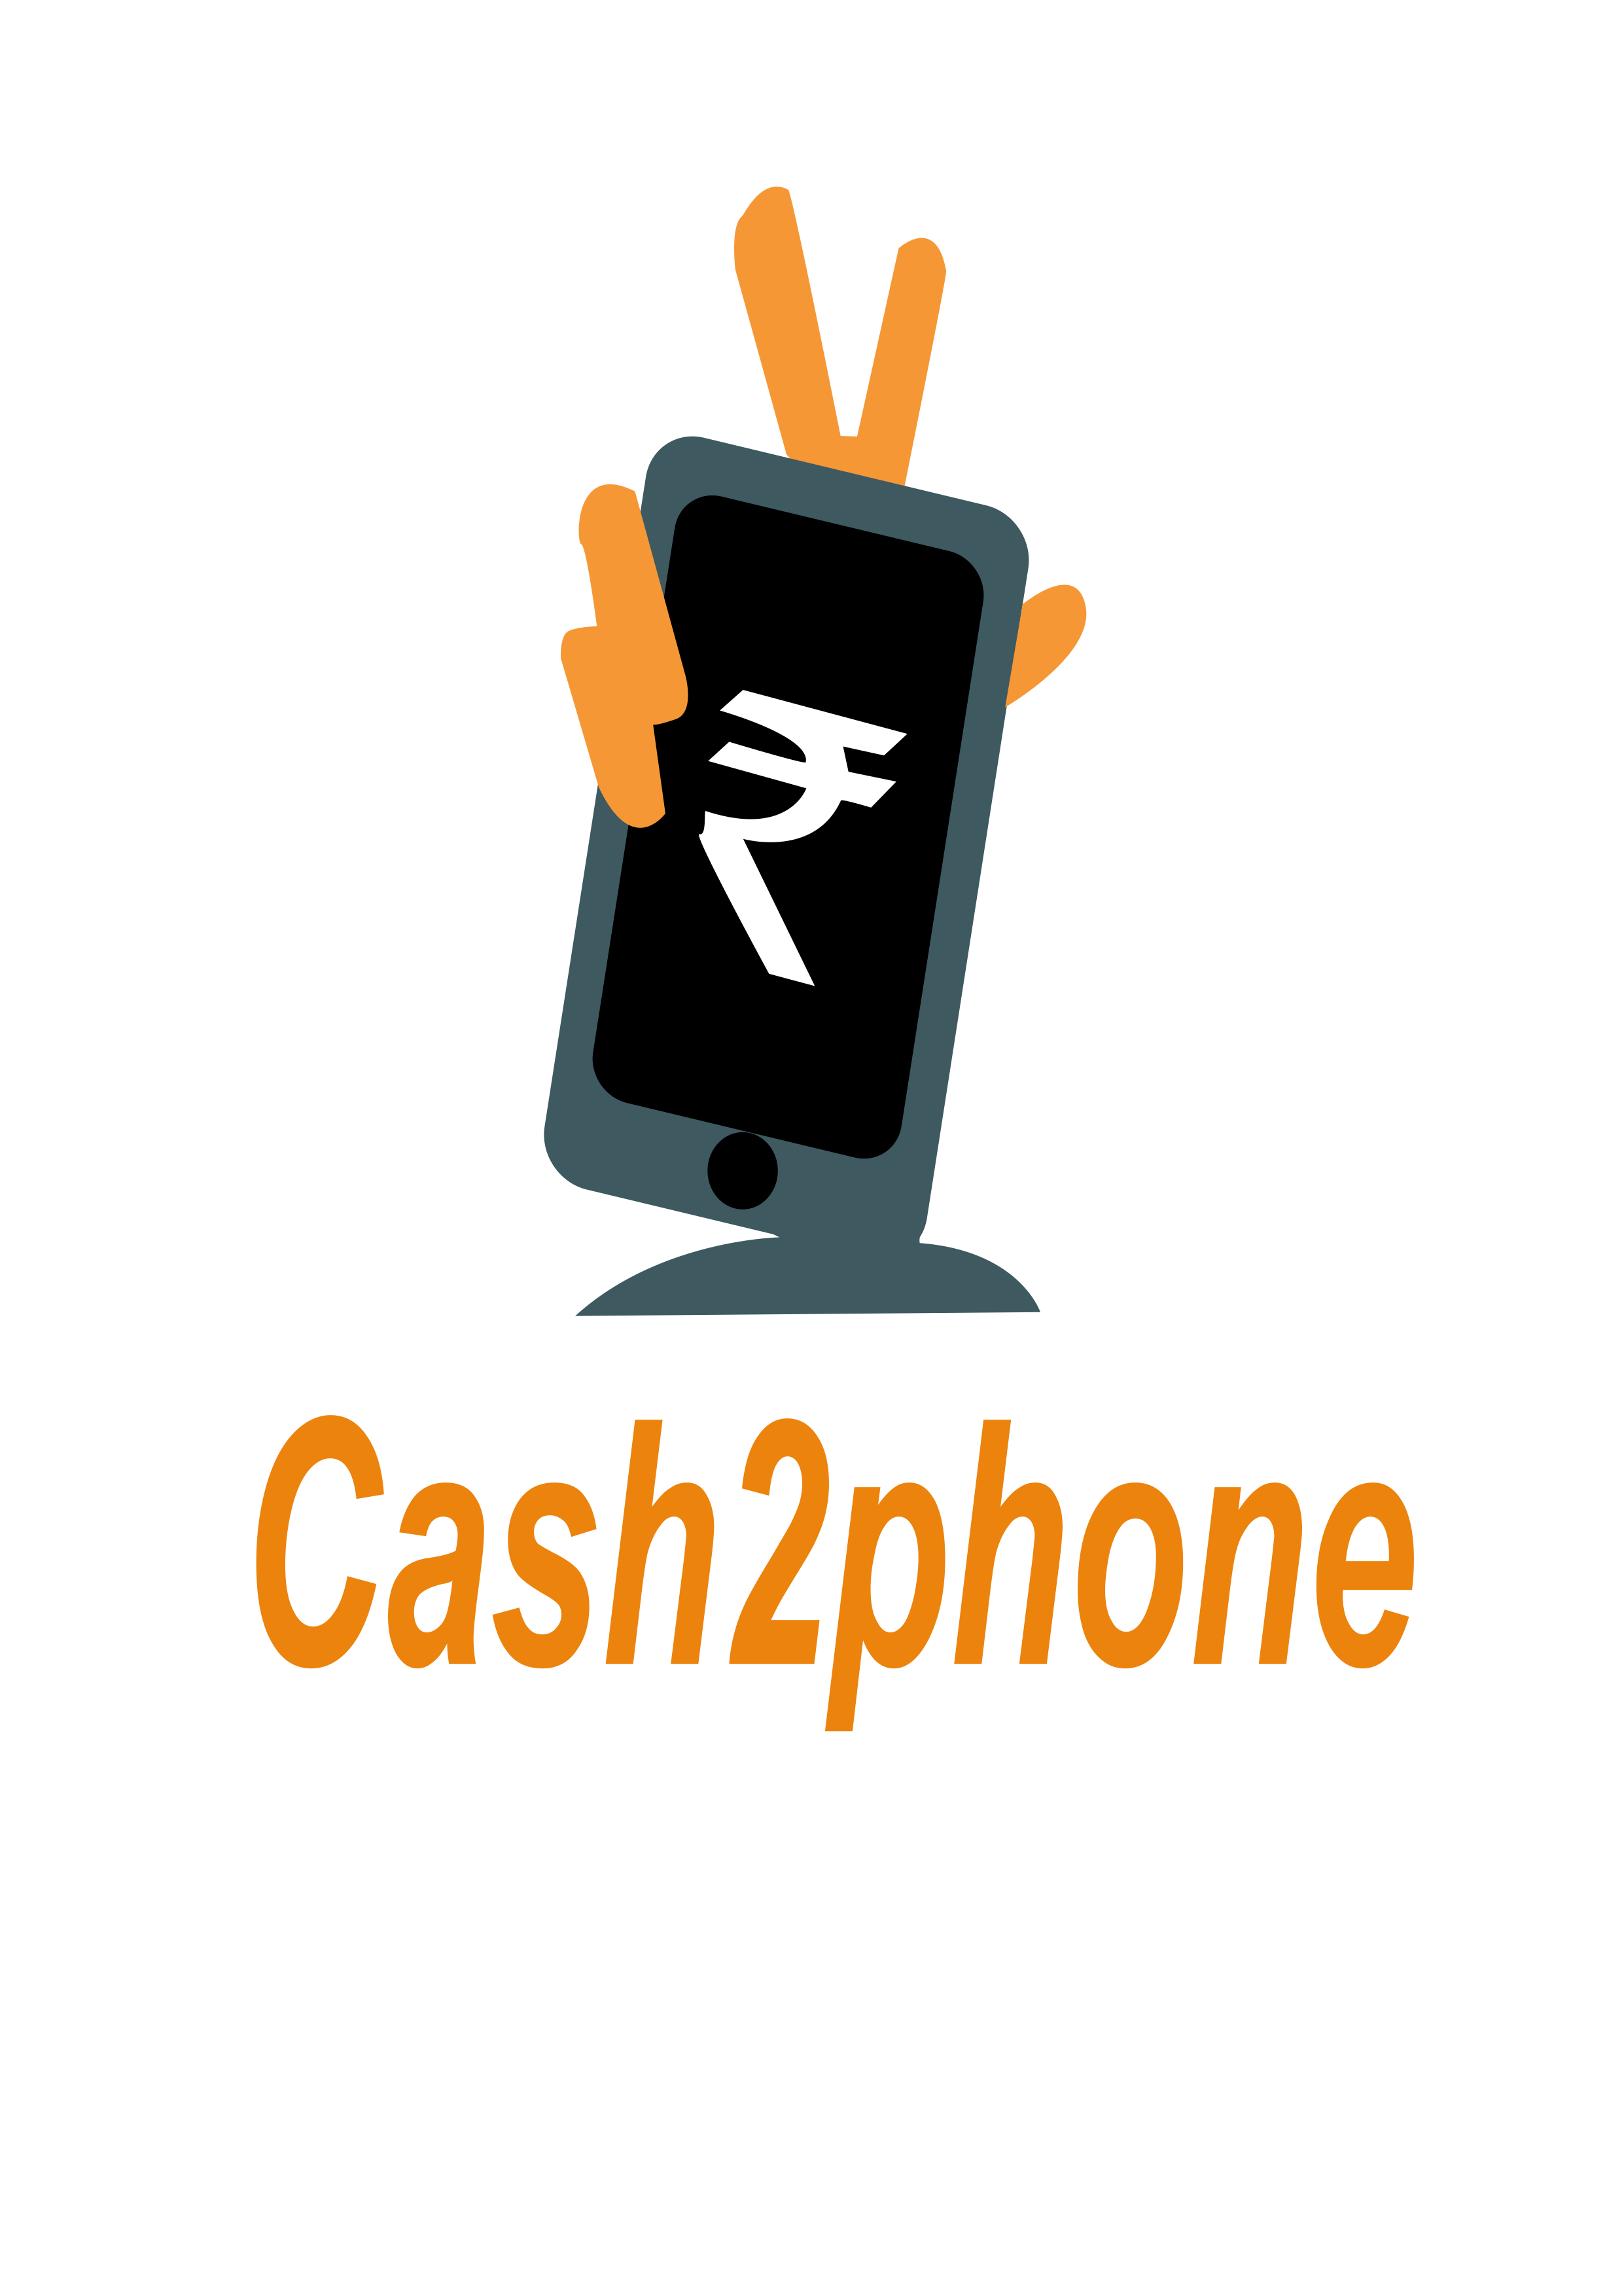 Sell Old Mobile Phone Online, Get Instant Cash